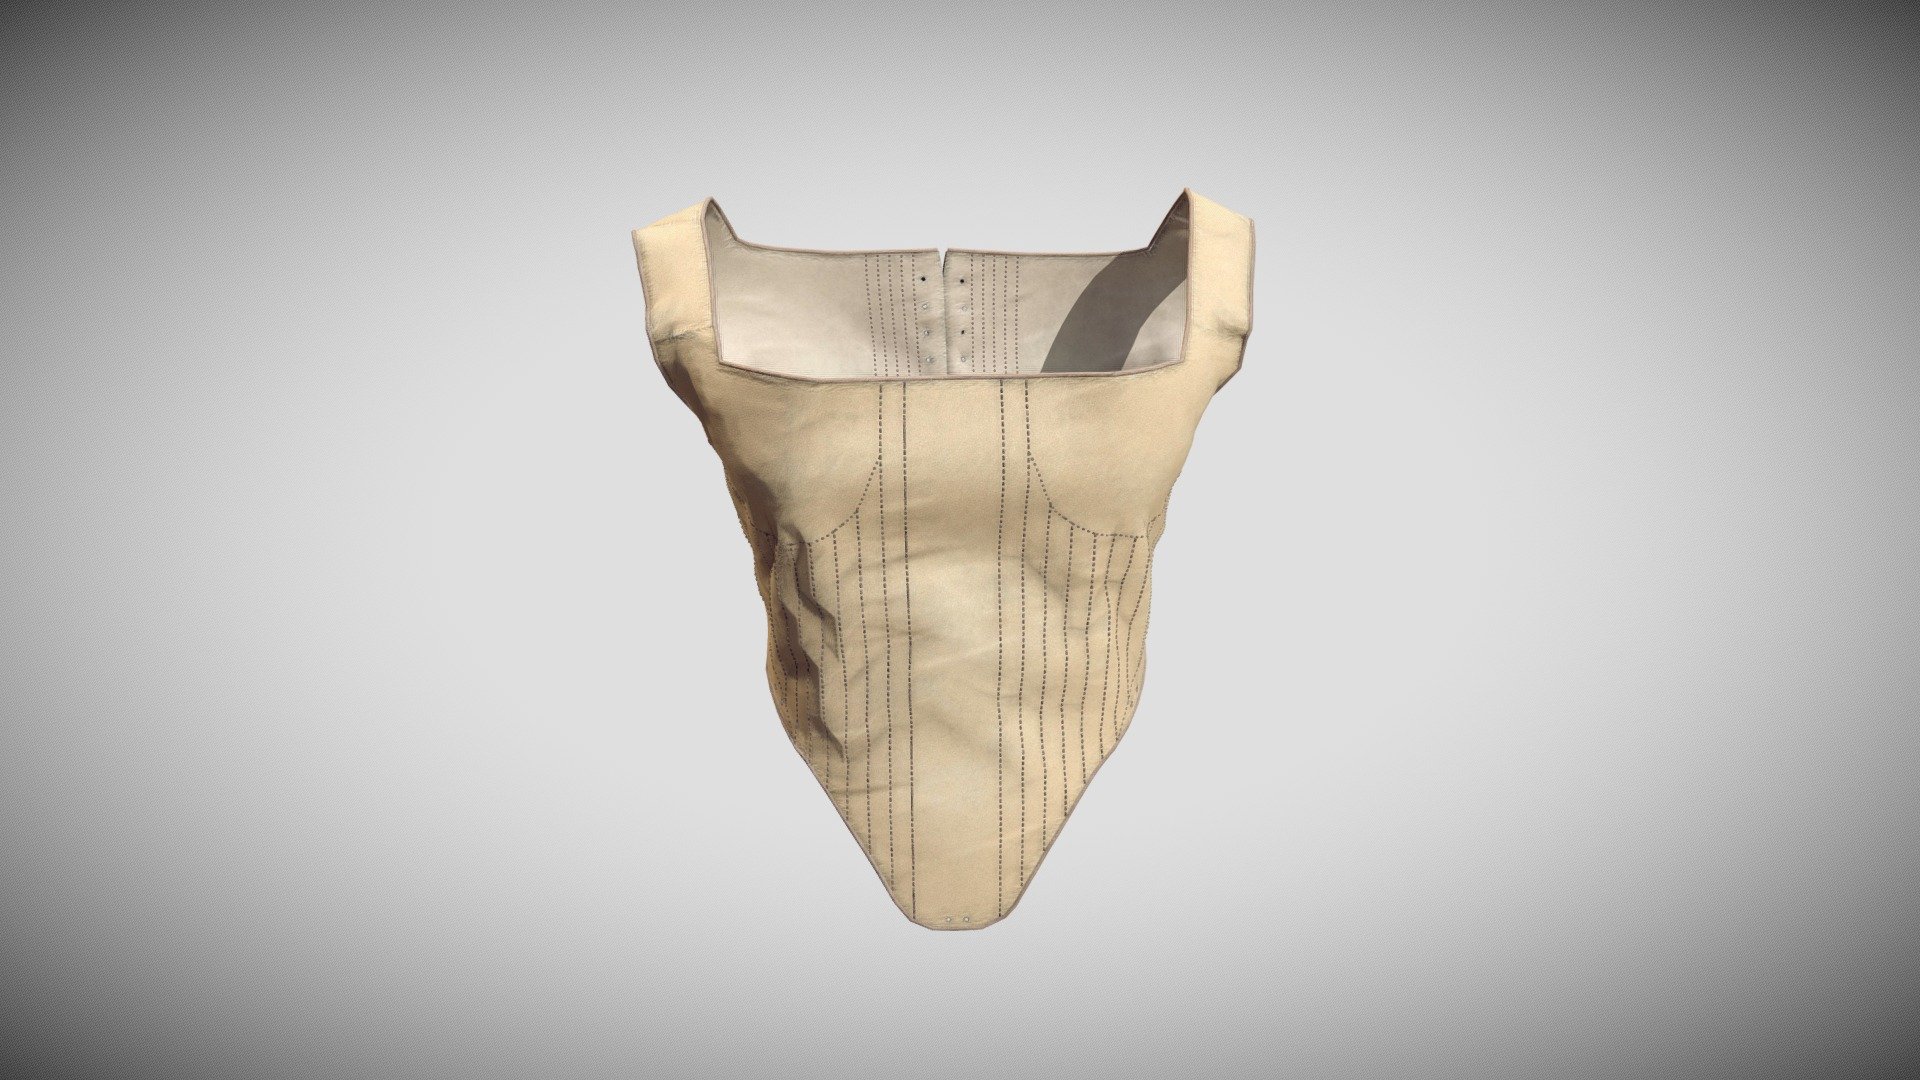 The 3D model presents a digital reconstruction of a corset dating to 1598. The corset was reconstructed by using the original block pattern presented in «Patterns of fashion. Part 3» by Janet Arnold. The pieces of the corset were sewn together and put on the body in Clo3D software (for further details see https://www.emerald.com/insight/content/doi/10.1108/IJCST-06-2019-0093/full/html). The 3D model was subsequently postprocessed in 3dsMax and textured in Substance Painter. The authors of the 3D model are

Aleksei Moskvin https://independent.academia.edu/AlekseiMoskvin

Mariia Moskvina https://independent.academia.edu/MariiaMoskvina

(Saint Petersburg State University of Industrial Technologies and Design)

DOI: http://dx.doi.org/10.13140/RG.2.2.23996.77445

https://www.researchgate.net/publication/357186786_Corset_1598_-_a_digital_reconstruction - Corset (1598) – a digital reconstruction - 3D model by Aleksei Moskvin (@alekseimoskvin1) 3d model